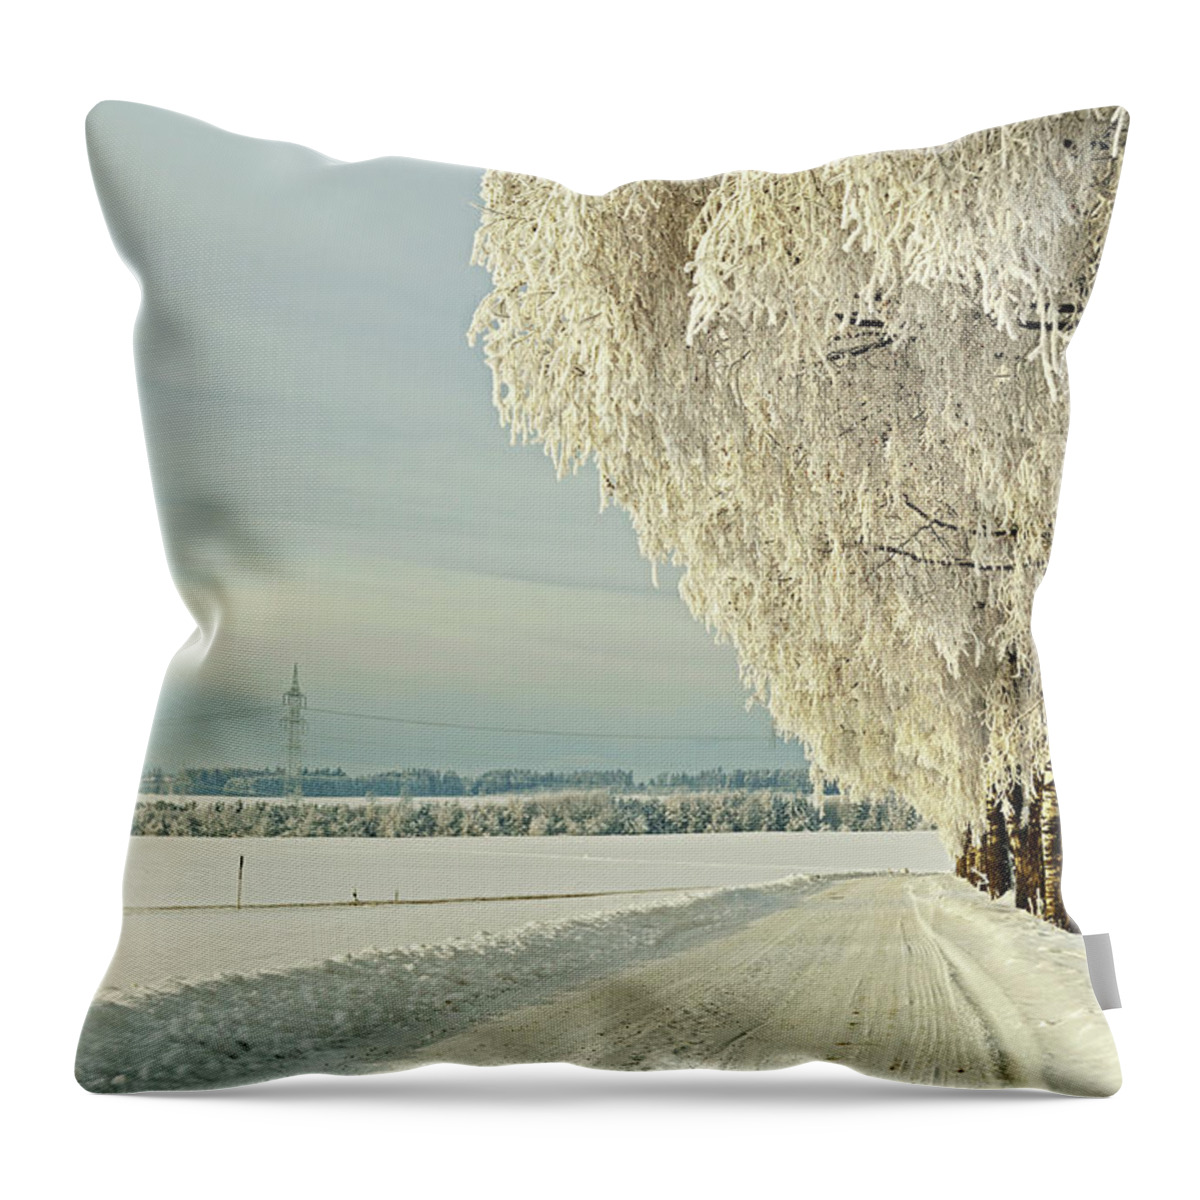 Scenics Throw Pillow featuring the photograph Birch Trees With Hoar Frost #1 by Jochen Schlenker